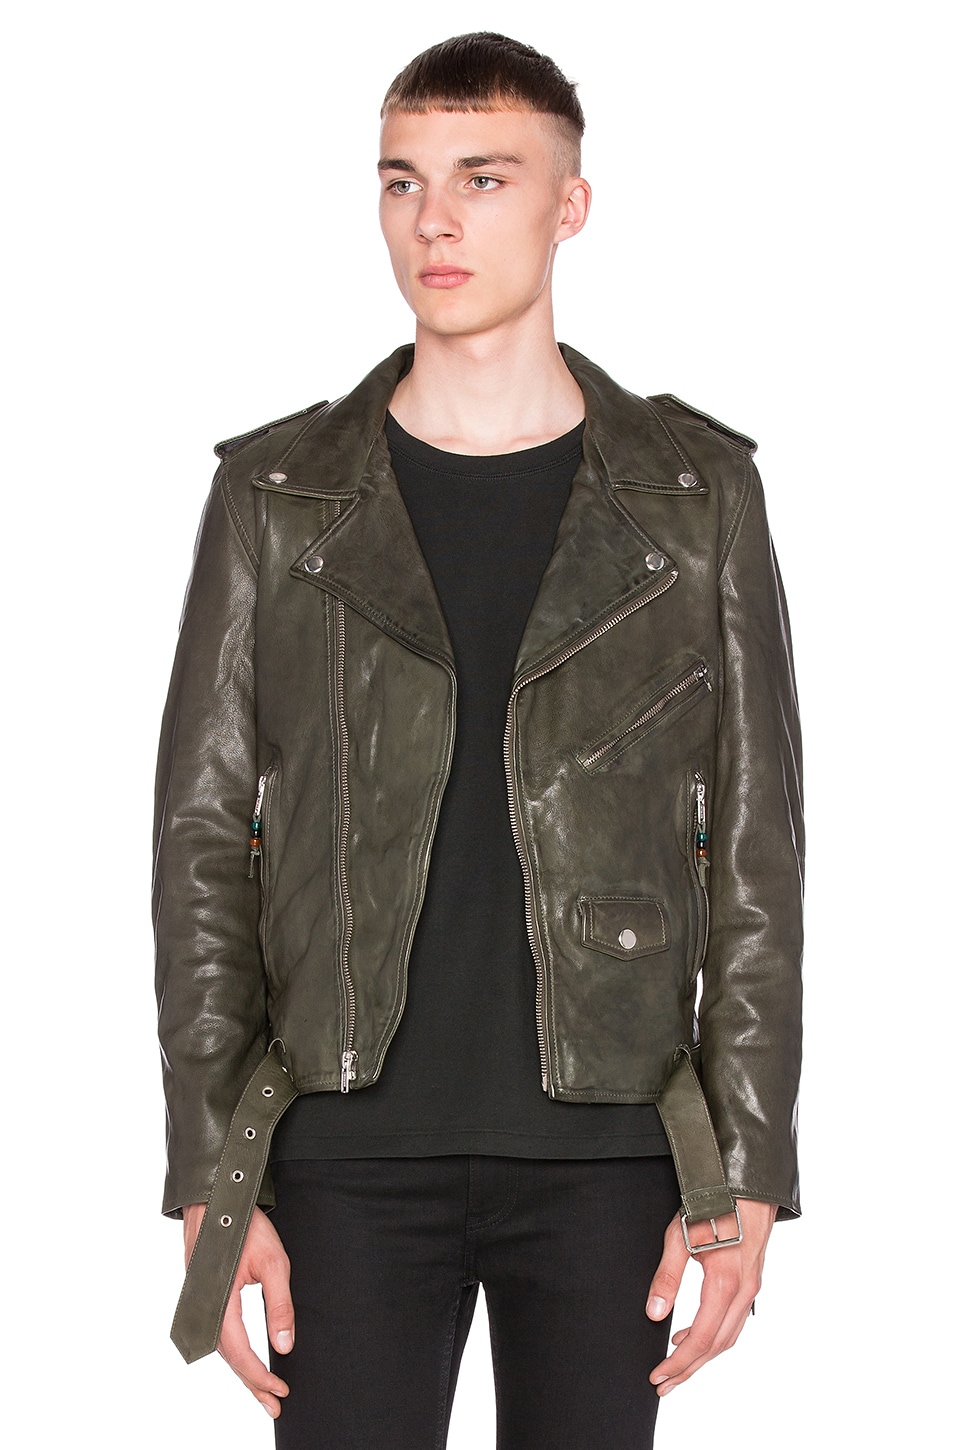 BLK DNM X REVOLVE MAN Exclusive Leather Jacket 5 in Military Green ...